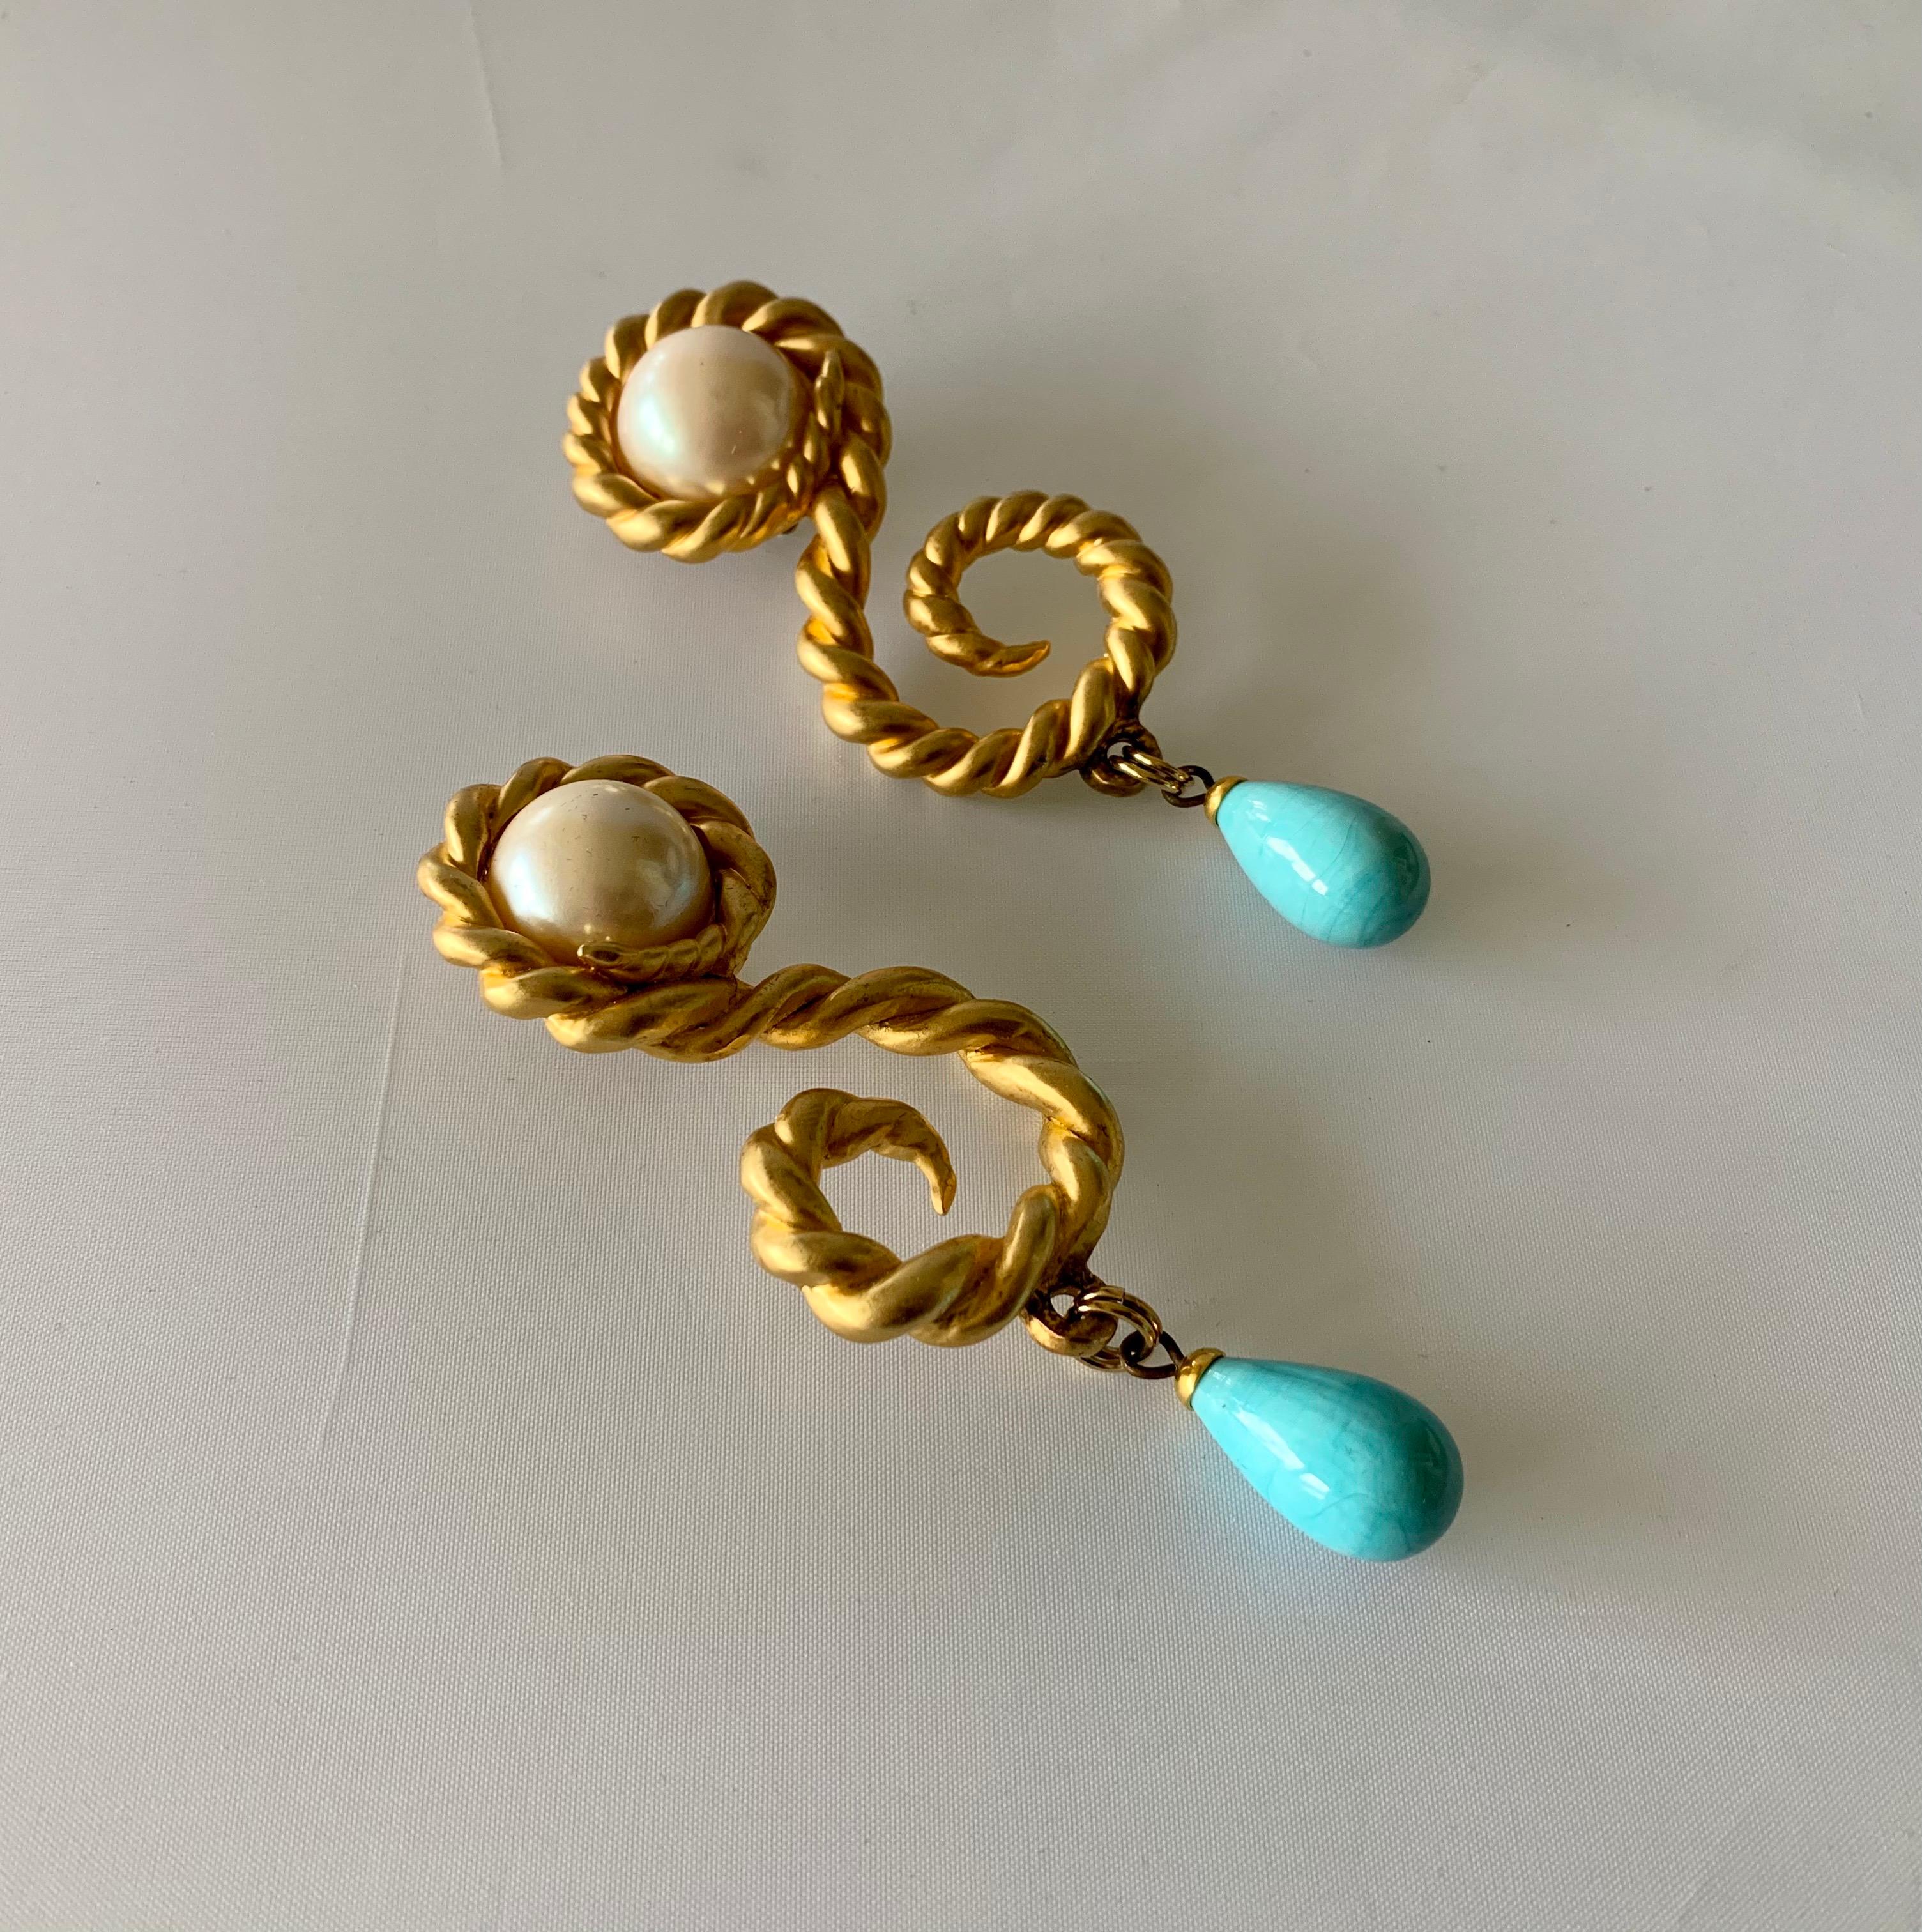 Scarce large vintage Coco Chanel statement clip-on earrings, comprised out of satin gold metal in a swirl motif, the earrings feature large pearls at the center and large turquoise 